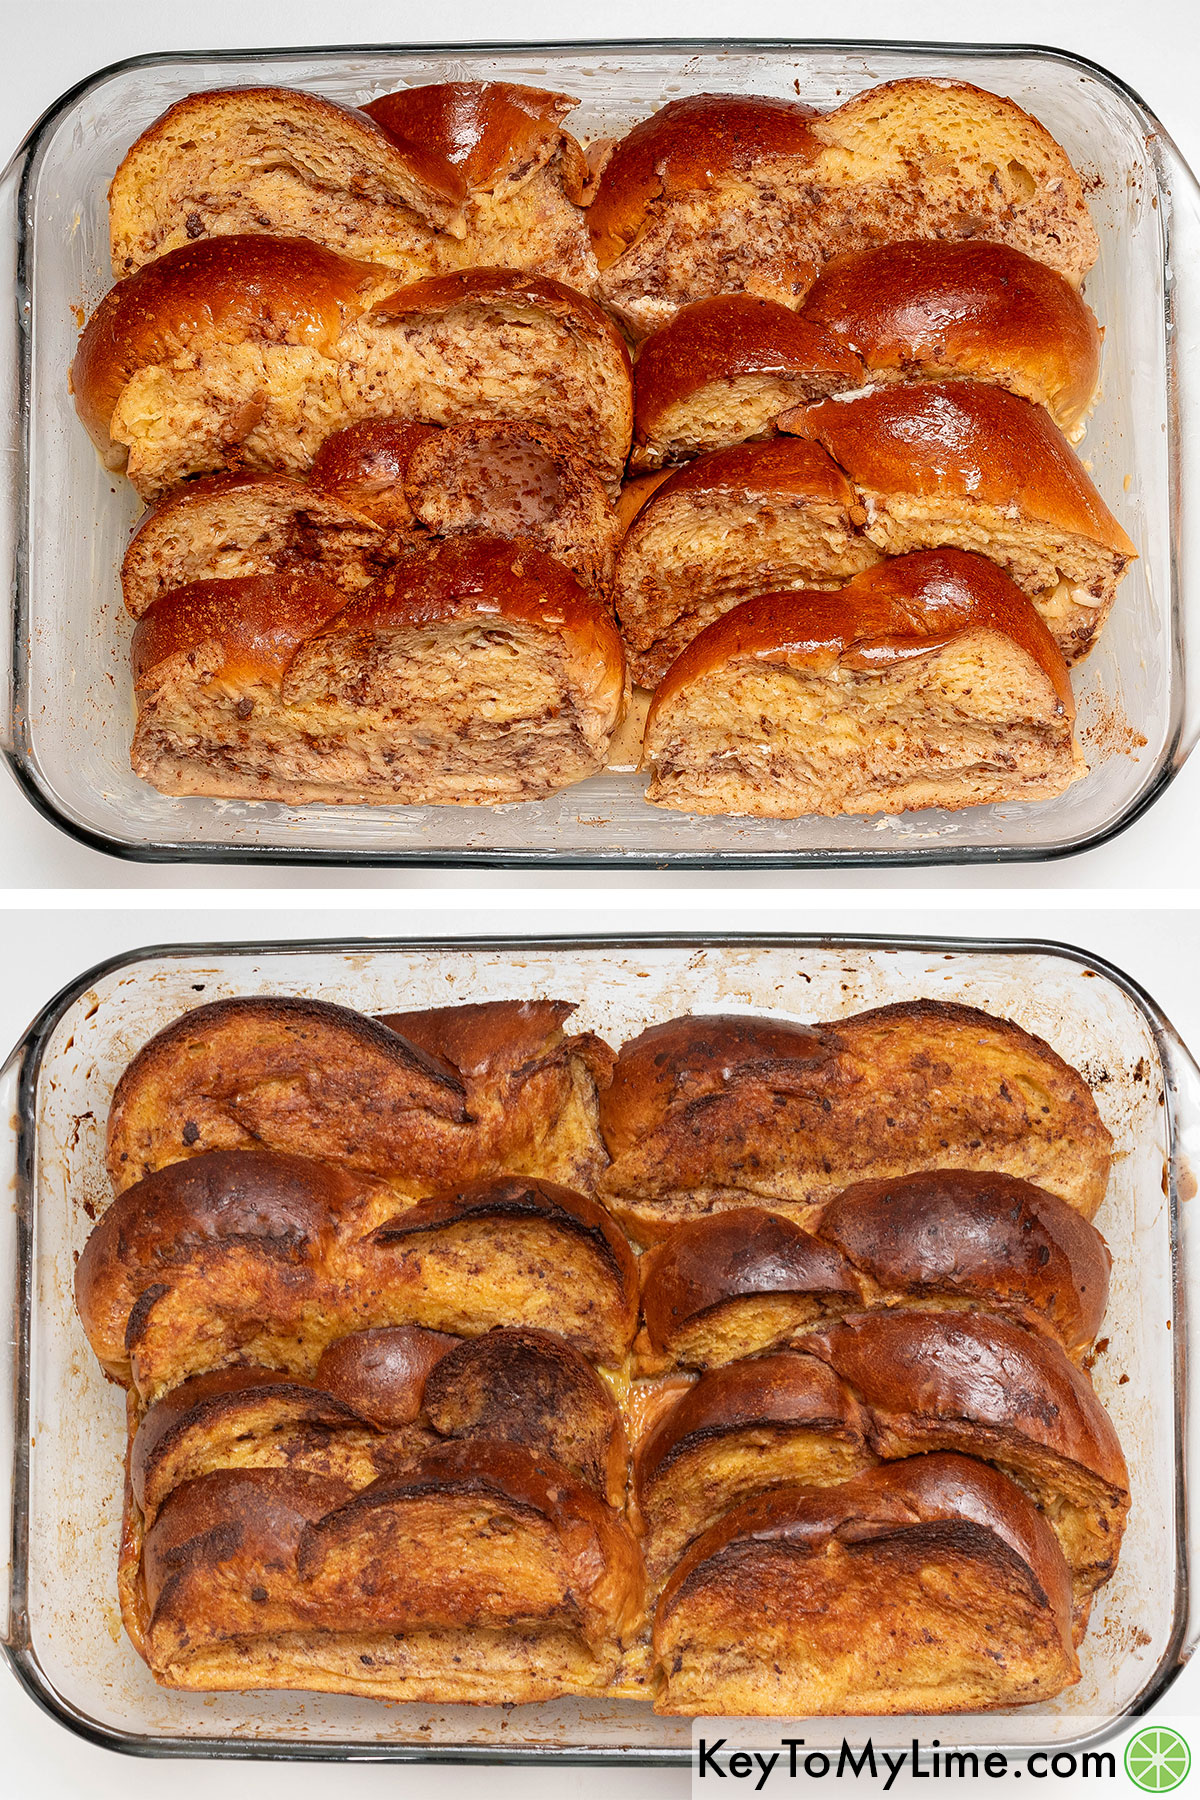 Uncovering the overnight soaked French toast, and then baking in an oven until golden.